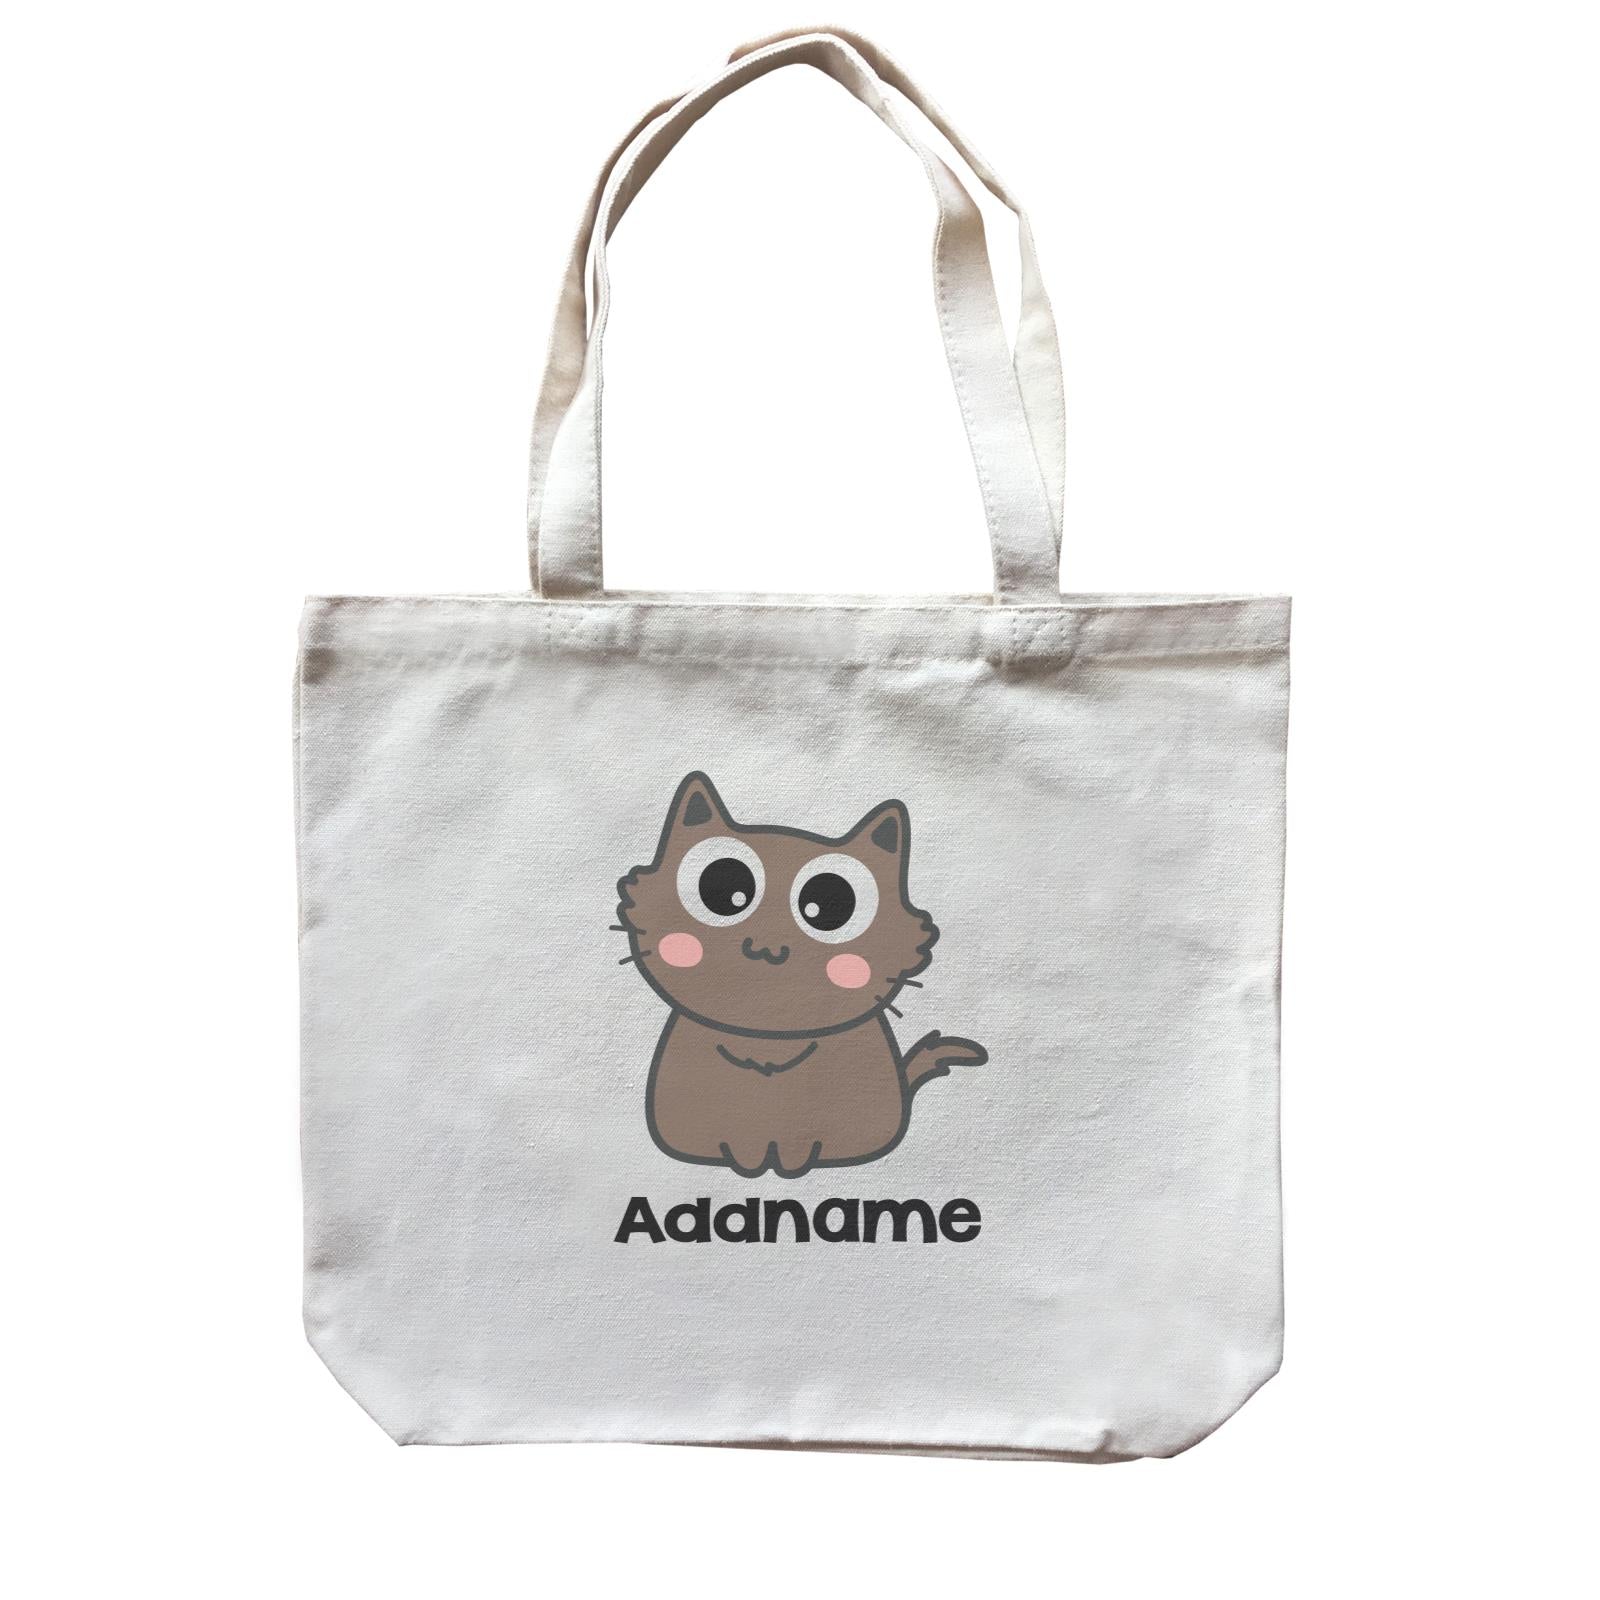 Drawn Adorable Cats Chocolate Addname Canvas Bag